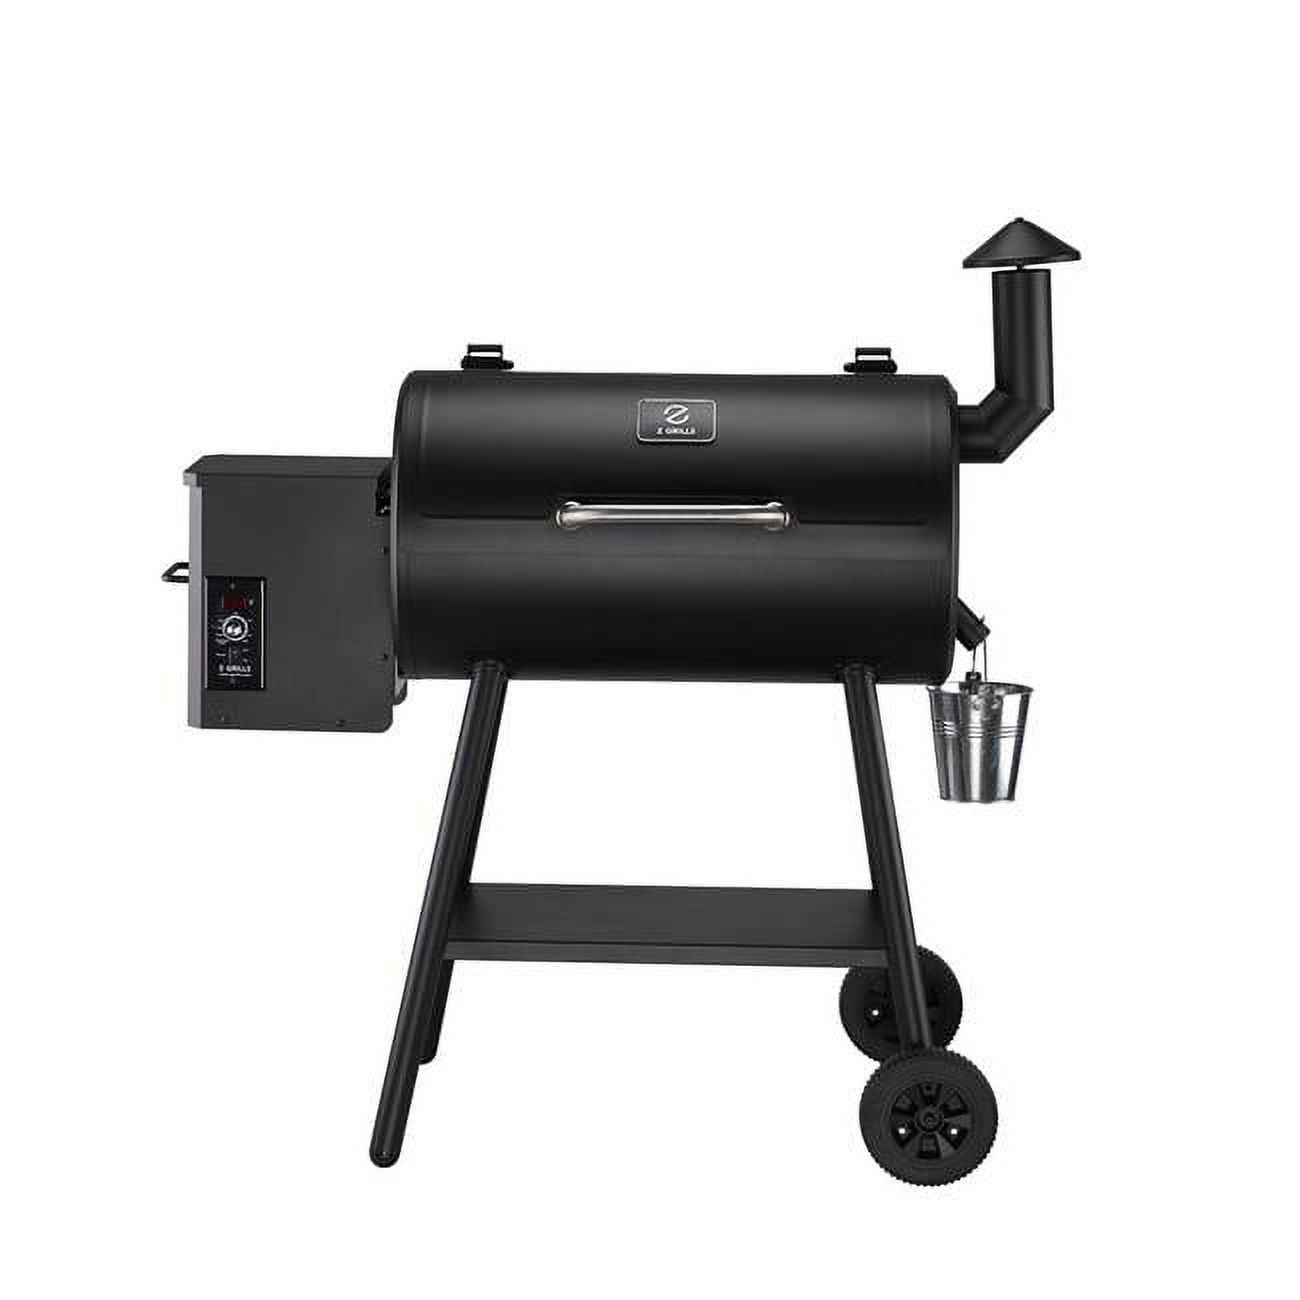 553 sq. in. Pellet Grill & Smoker - image 1 of 1